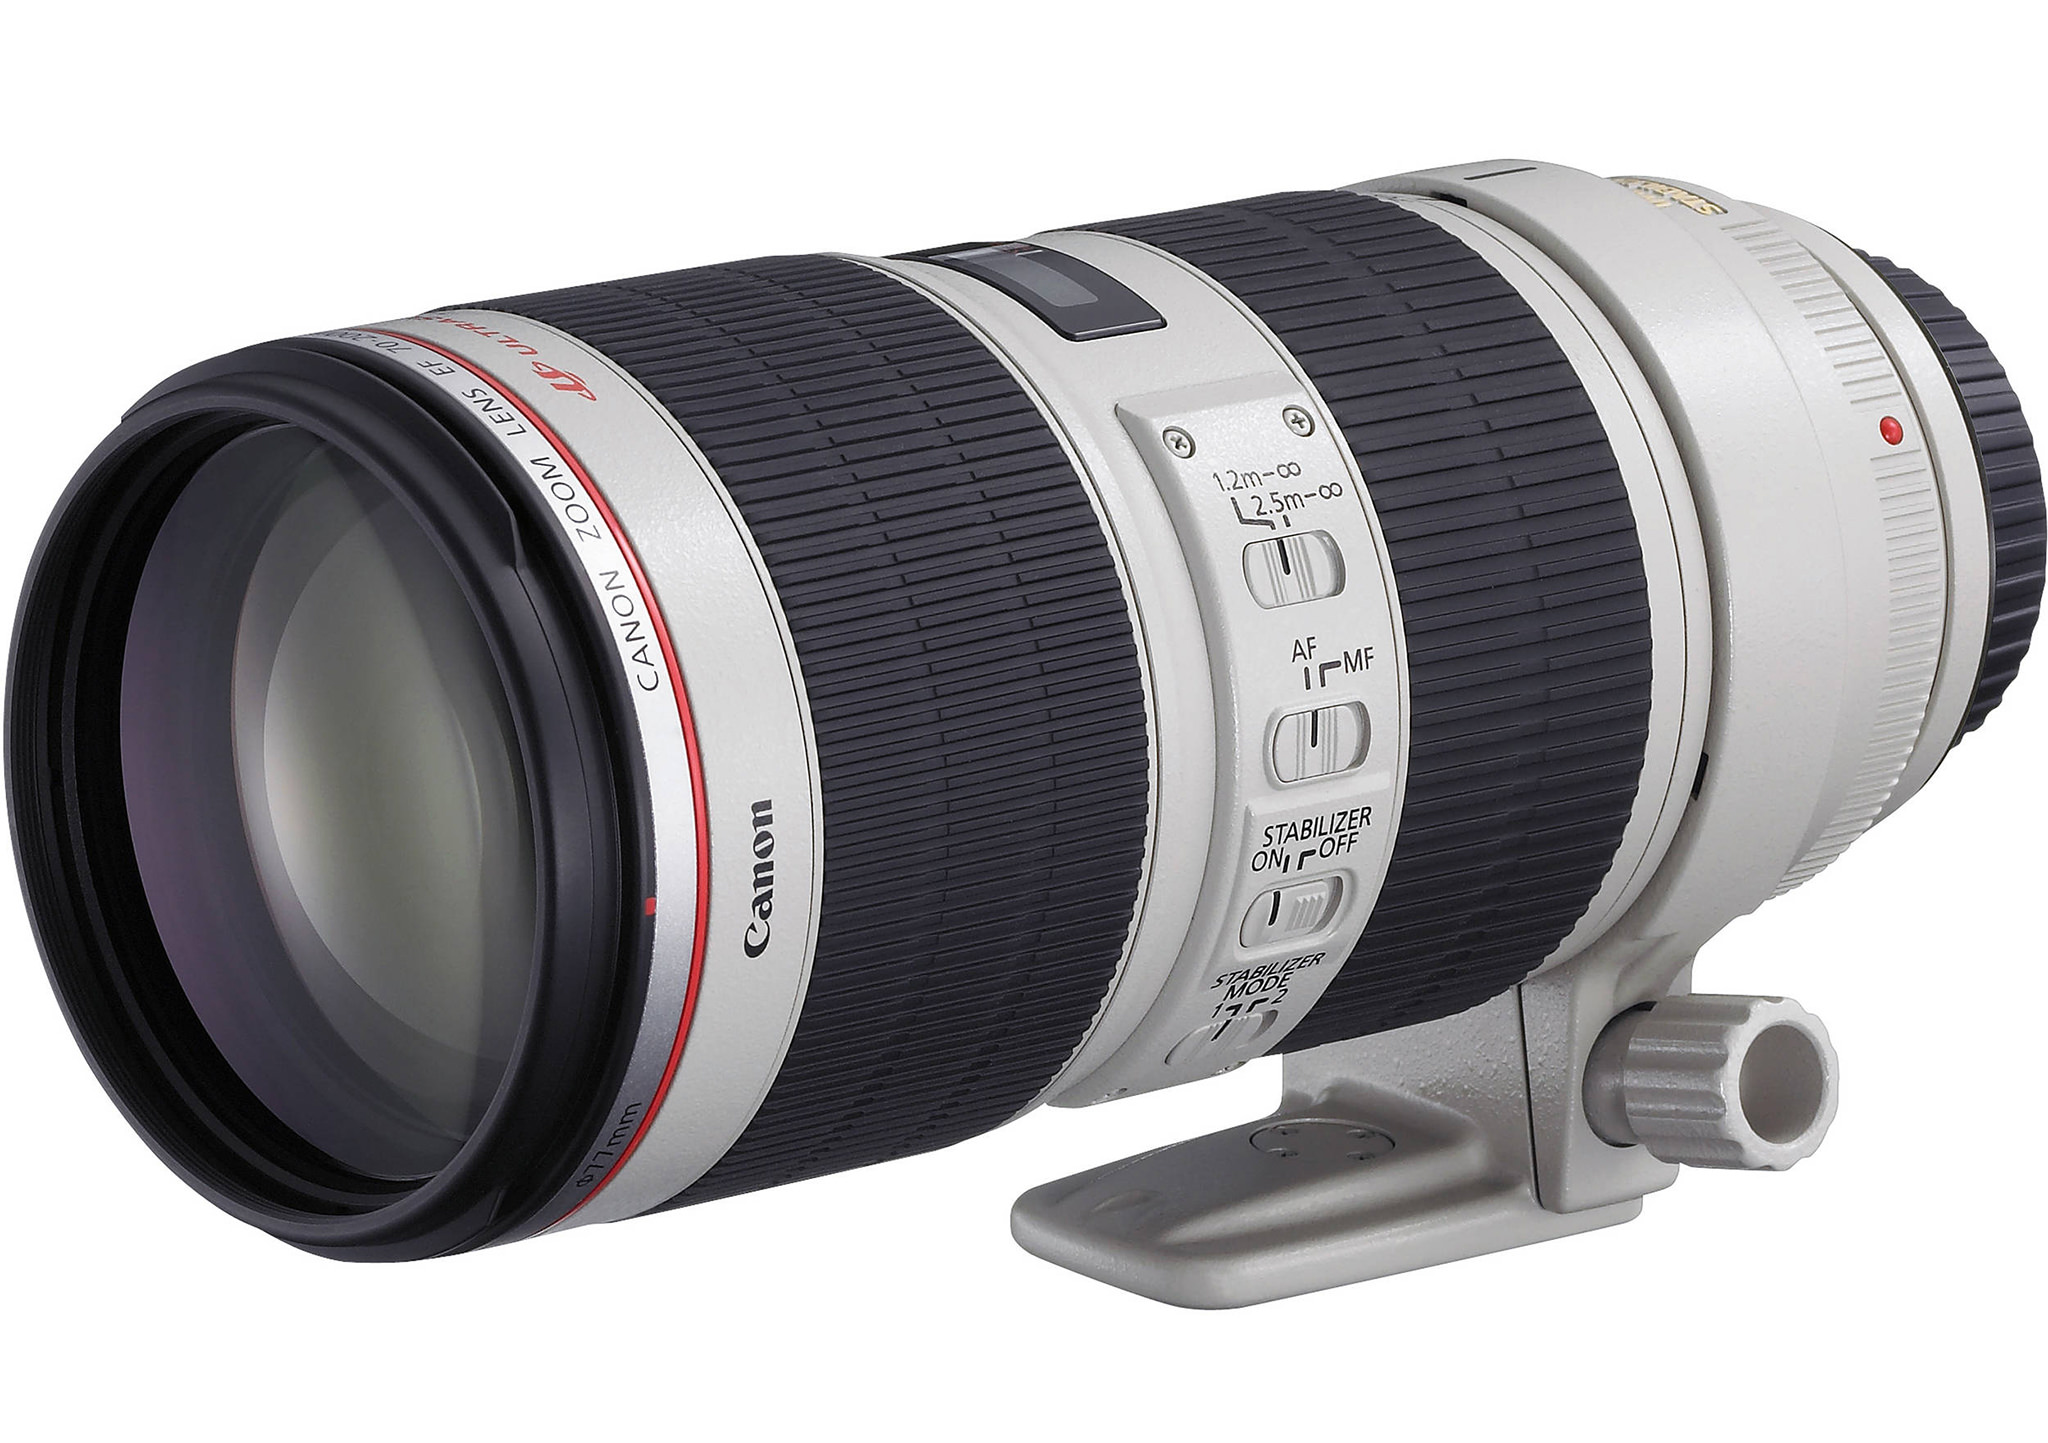 Canon EF 70-200mm f/2.8L IS II USM Review - Optical Features